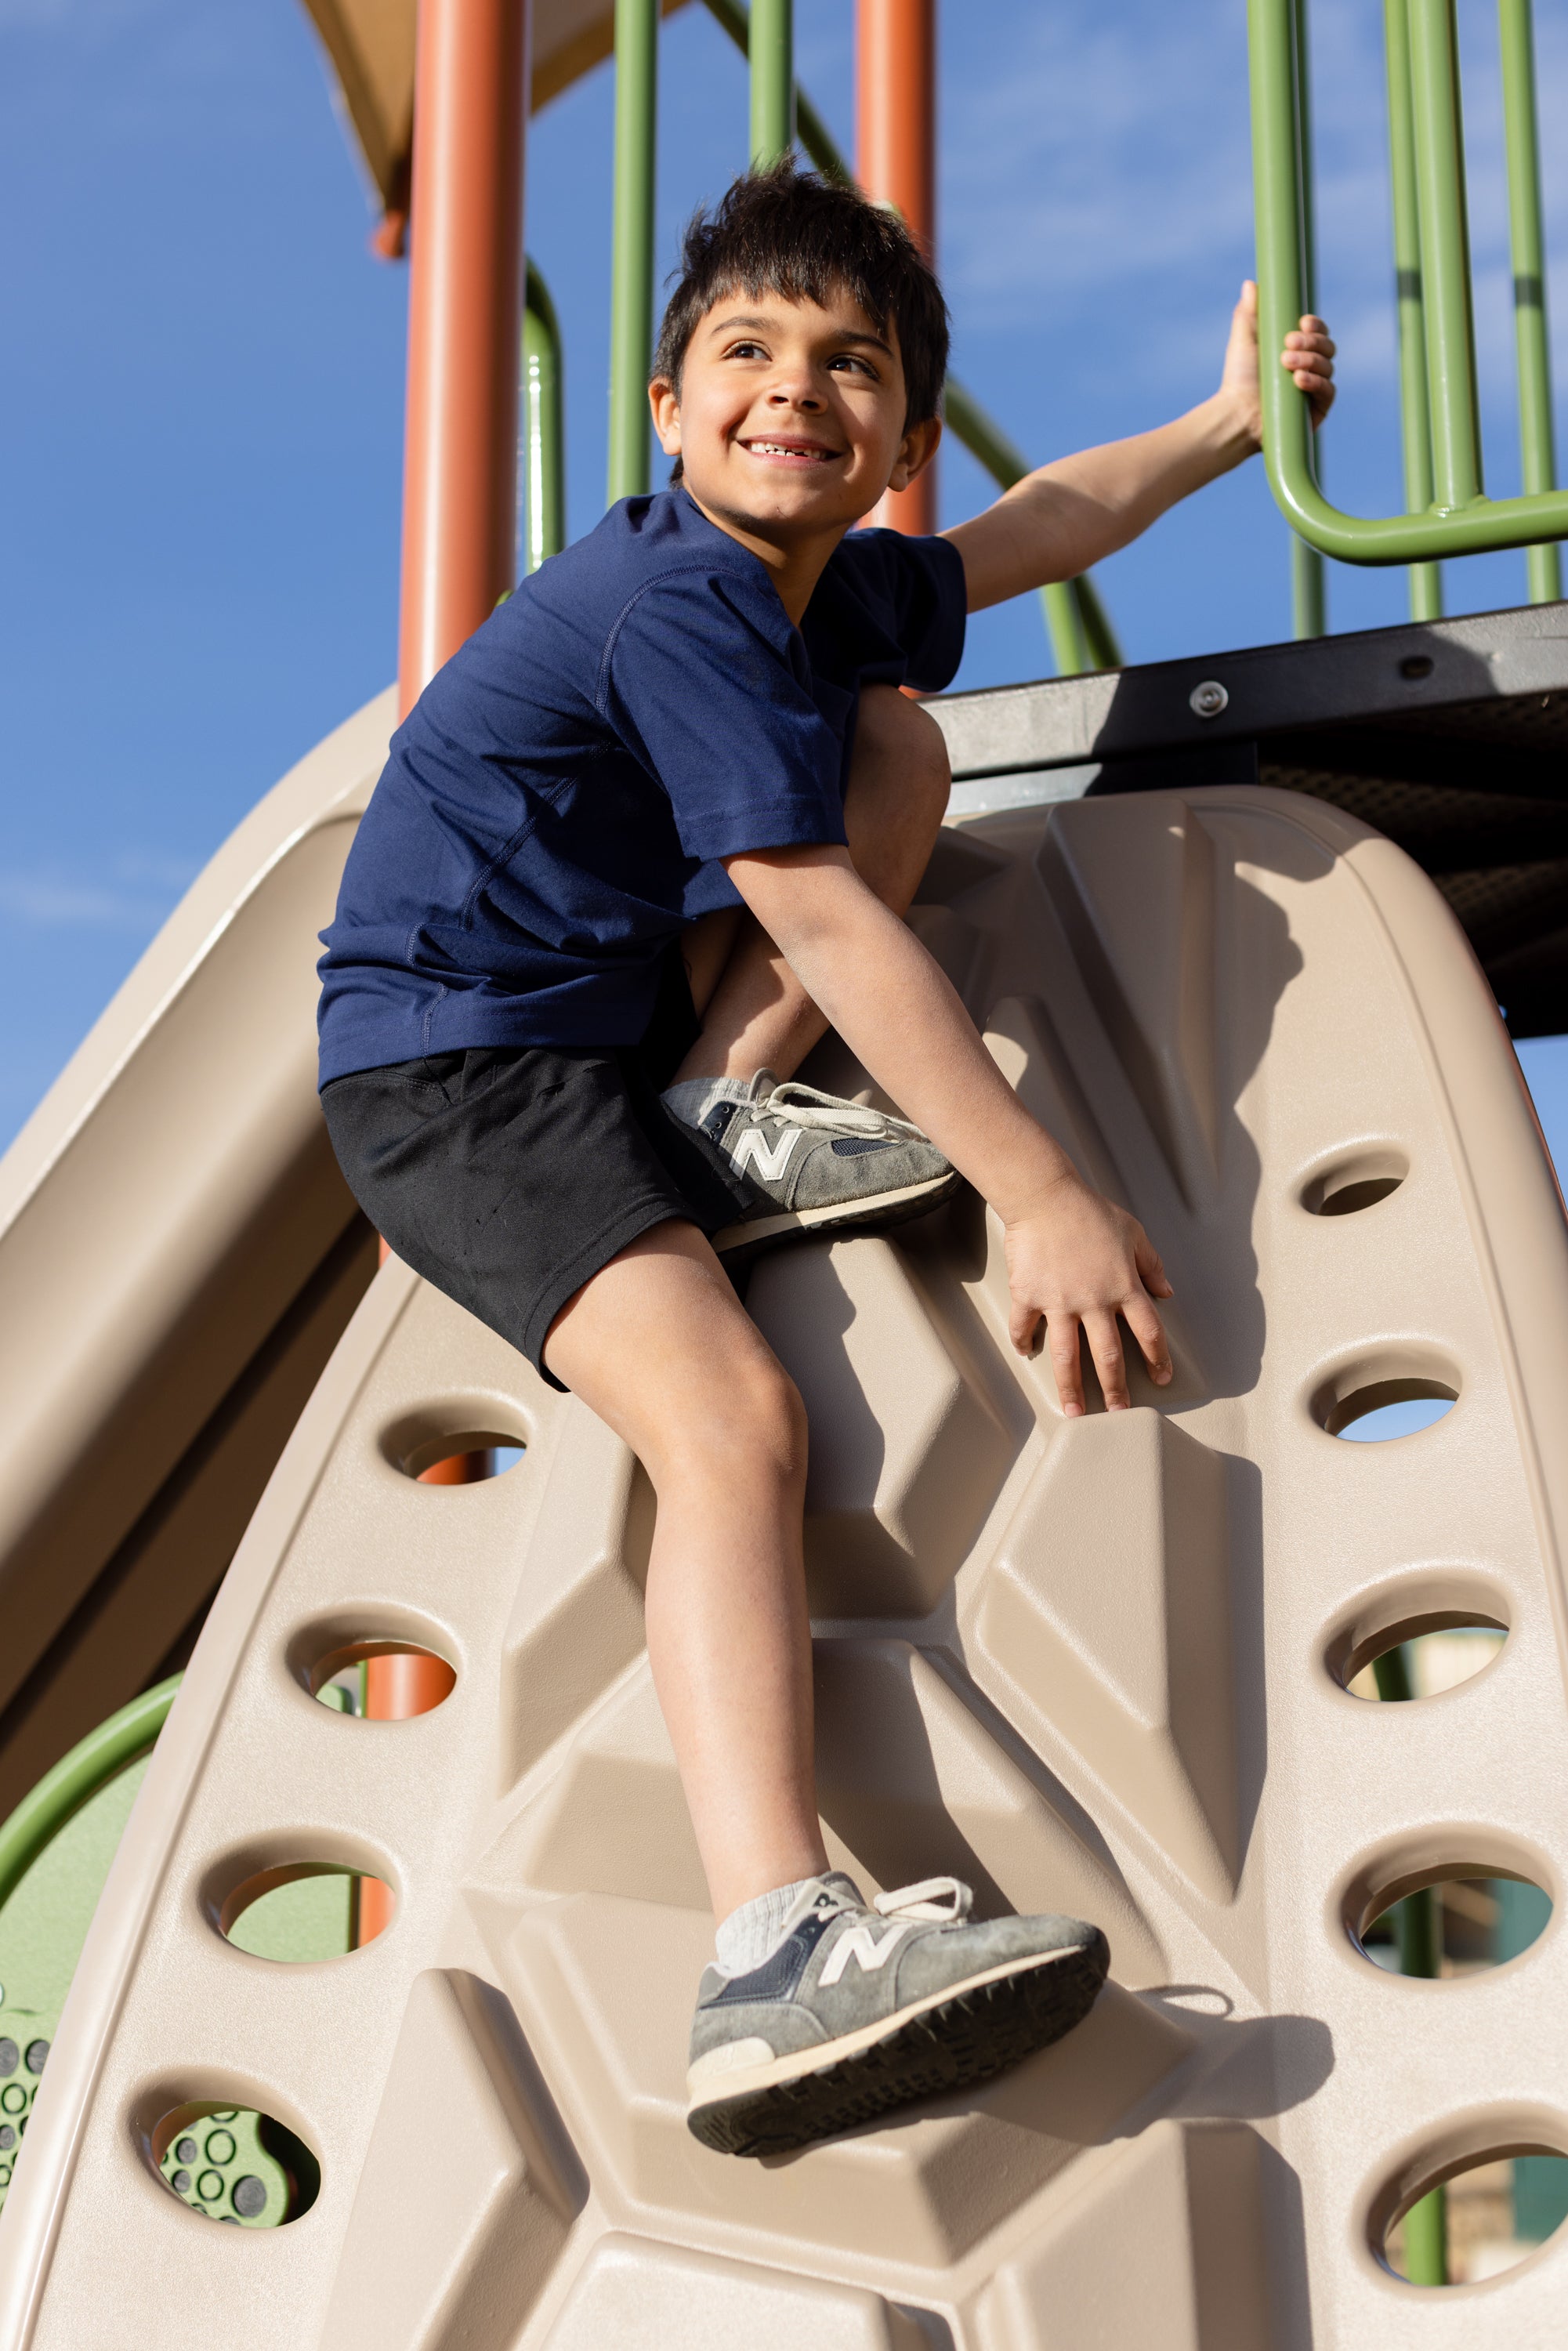 A little boy playing at the playground on a jungle gym climbing. He is wearing a navy blue basic t-shirt and black shorts. He has black hair and is looking off into the distance smiling.